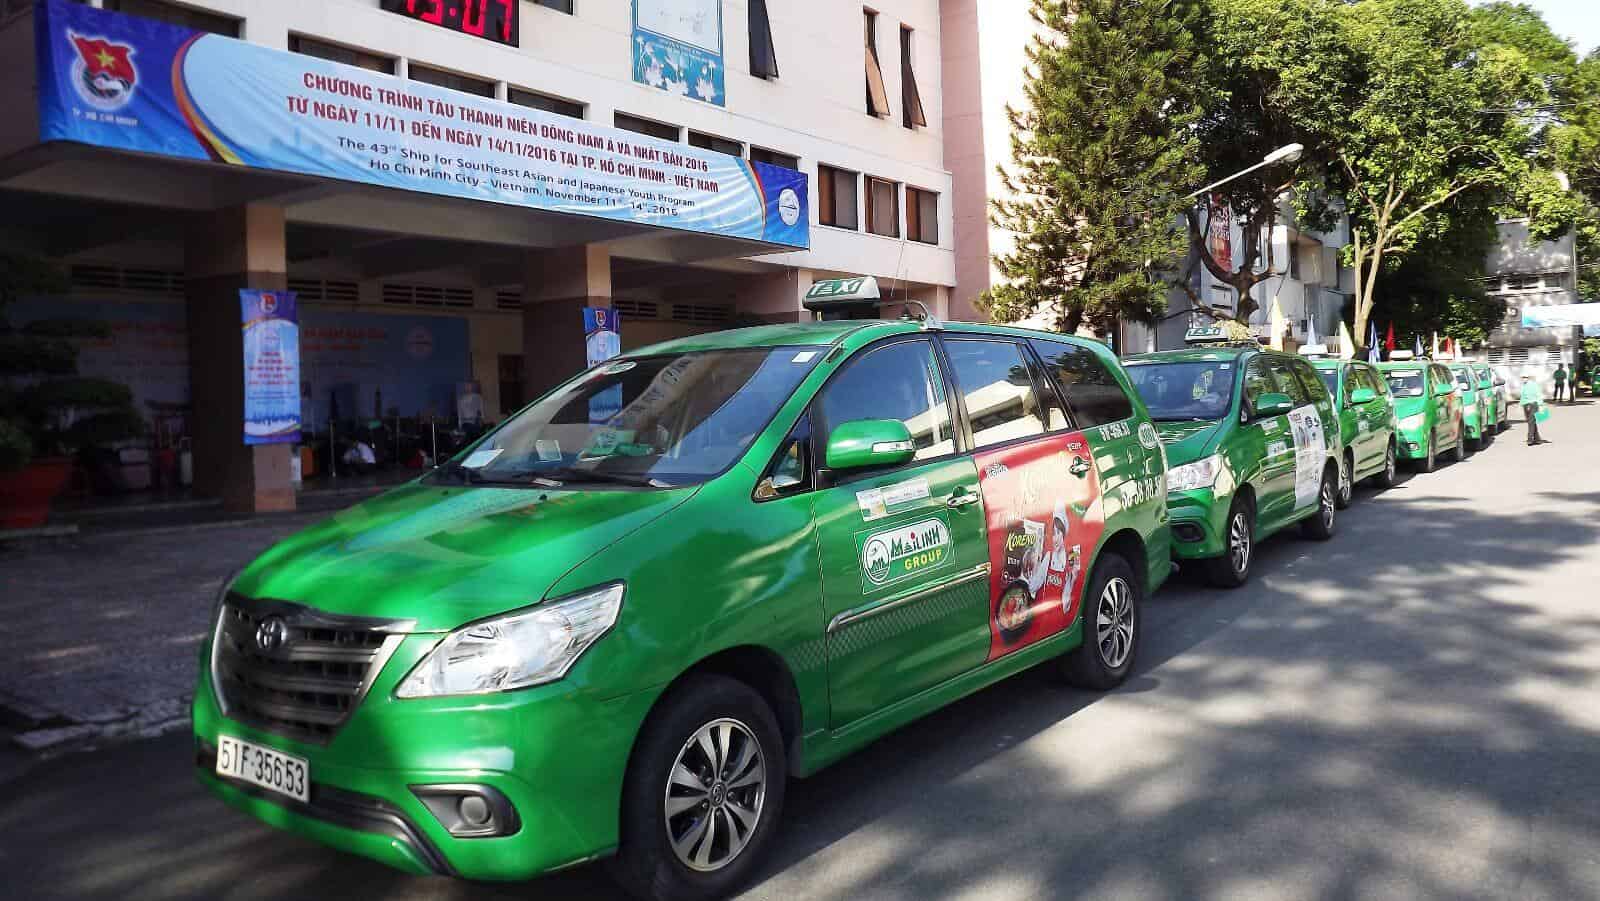 Green Mai Linh taxi is a good way to transfer from the airport to the city center. Watch out for fake brand taxis